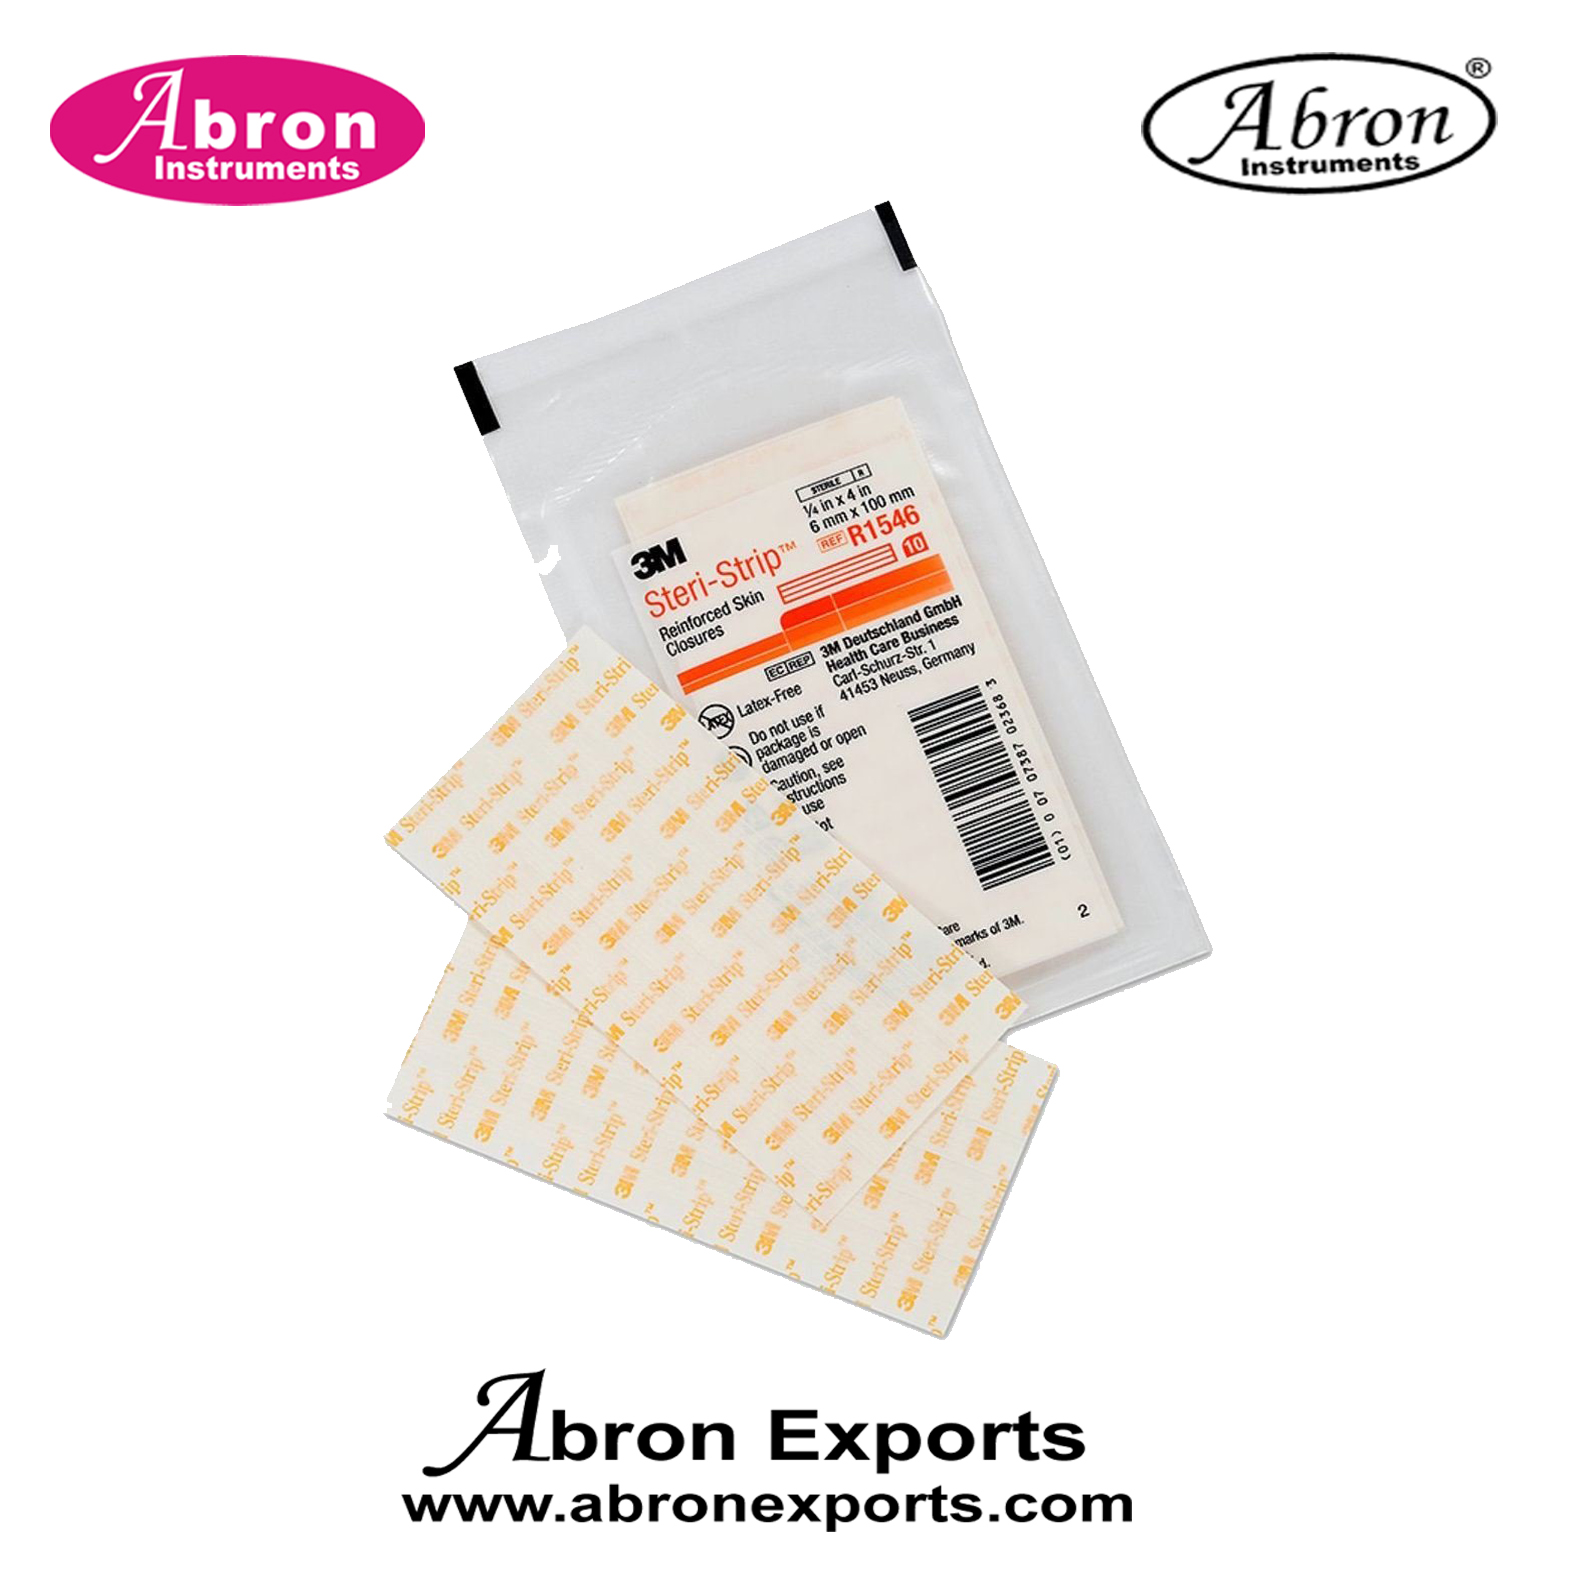 Surgical Bandage Cotton Bandage 3M Strip for dressing surgical first air kit pack of 100 abron ABM-2524M3 